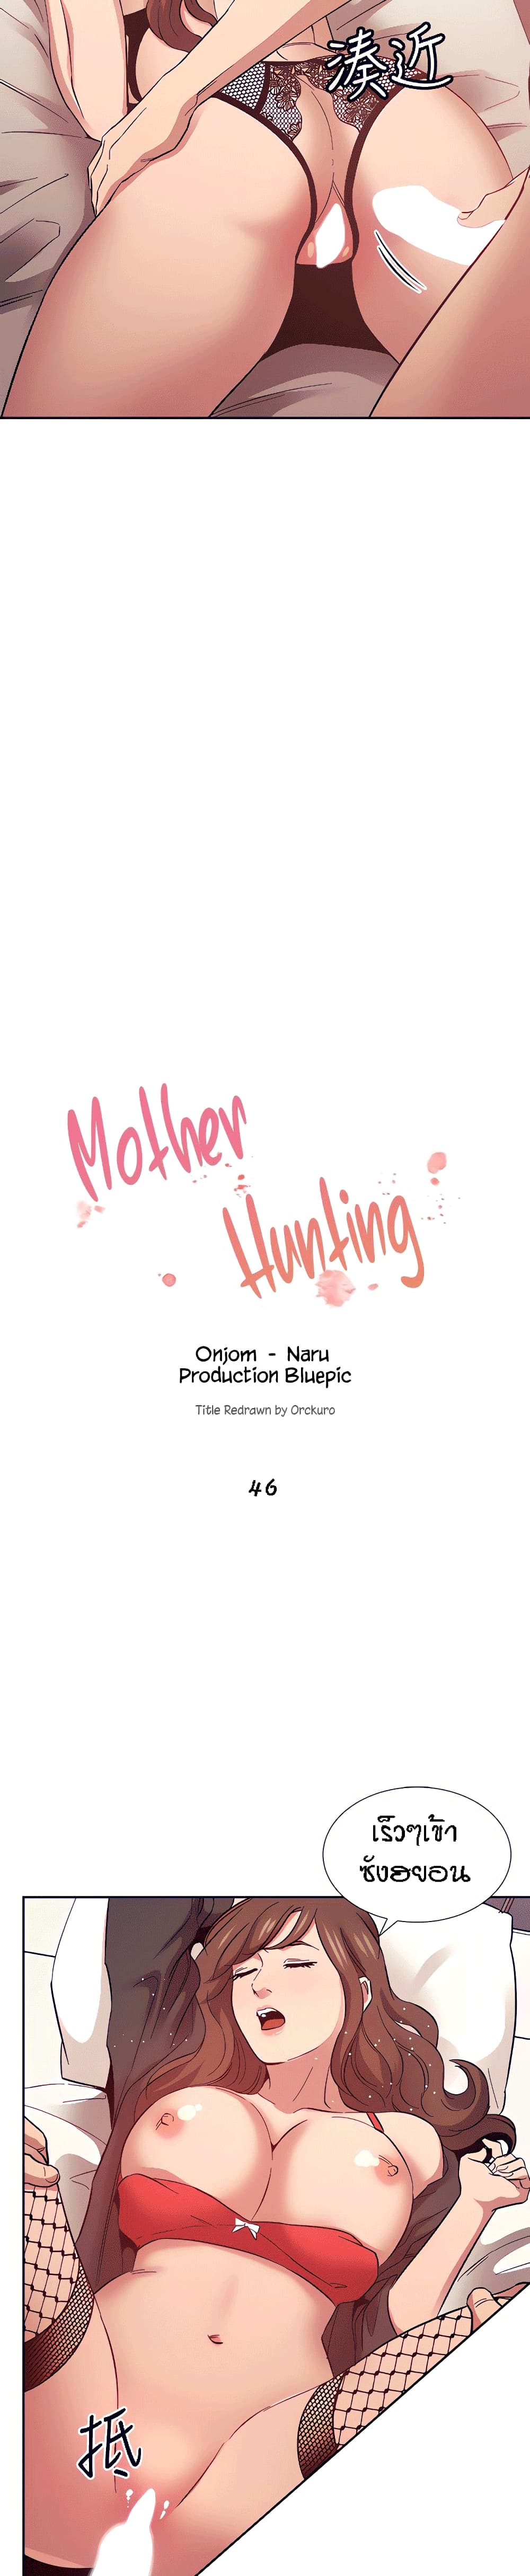 Mother Hunting 46-46